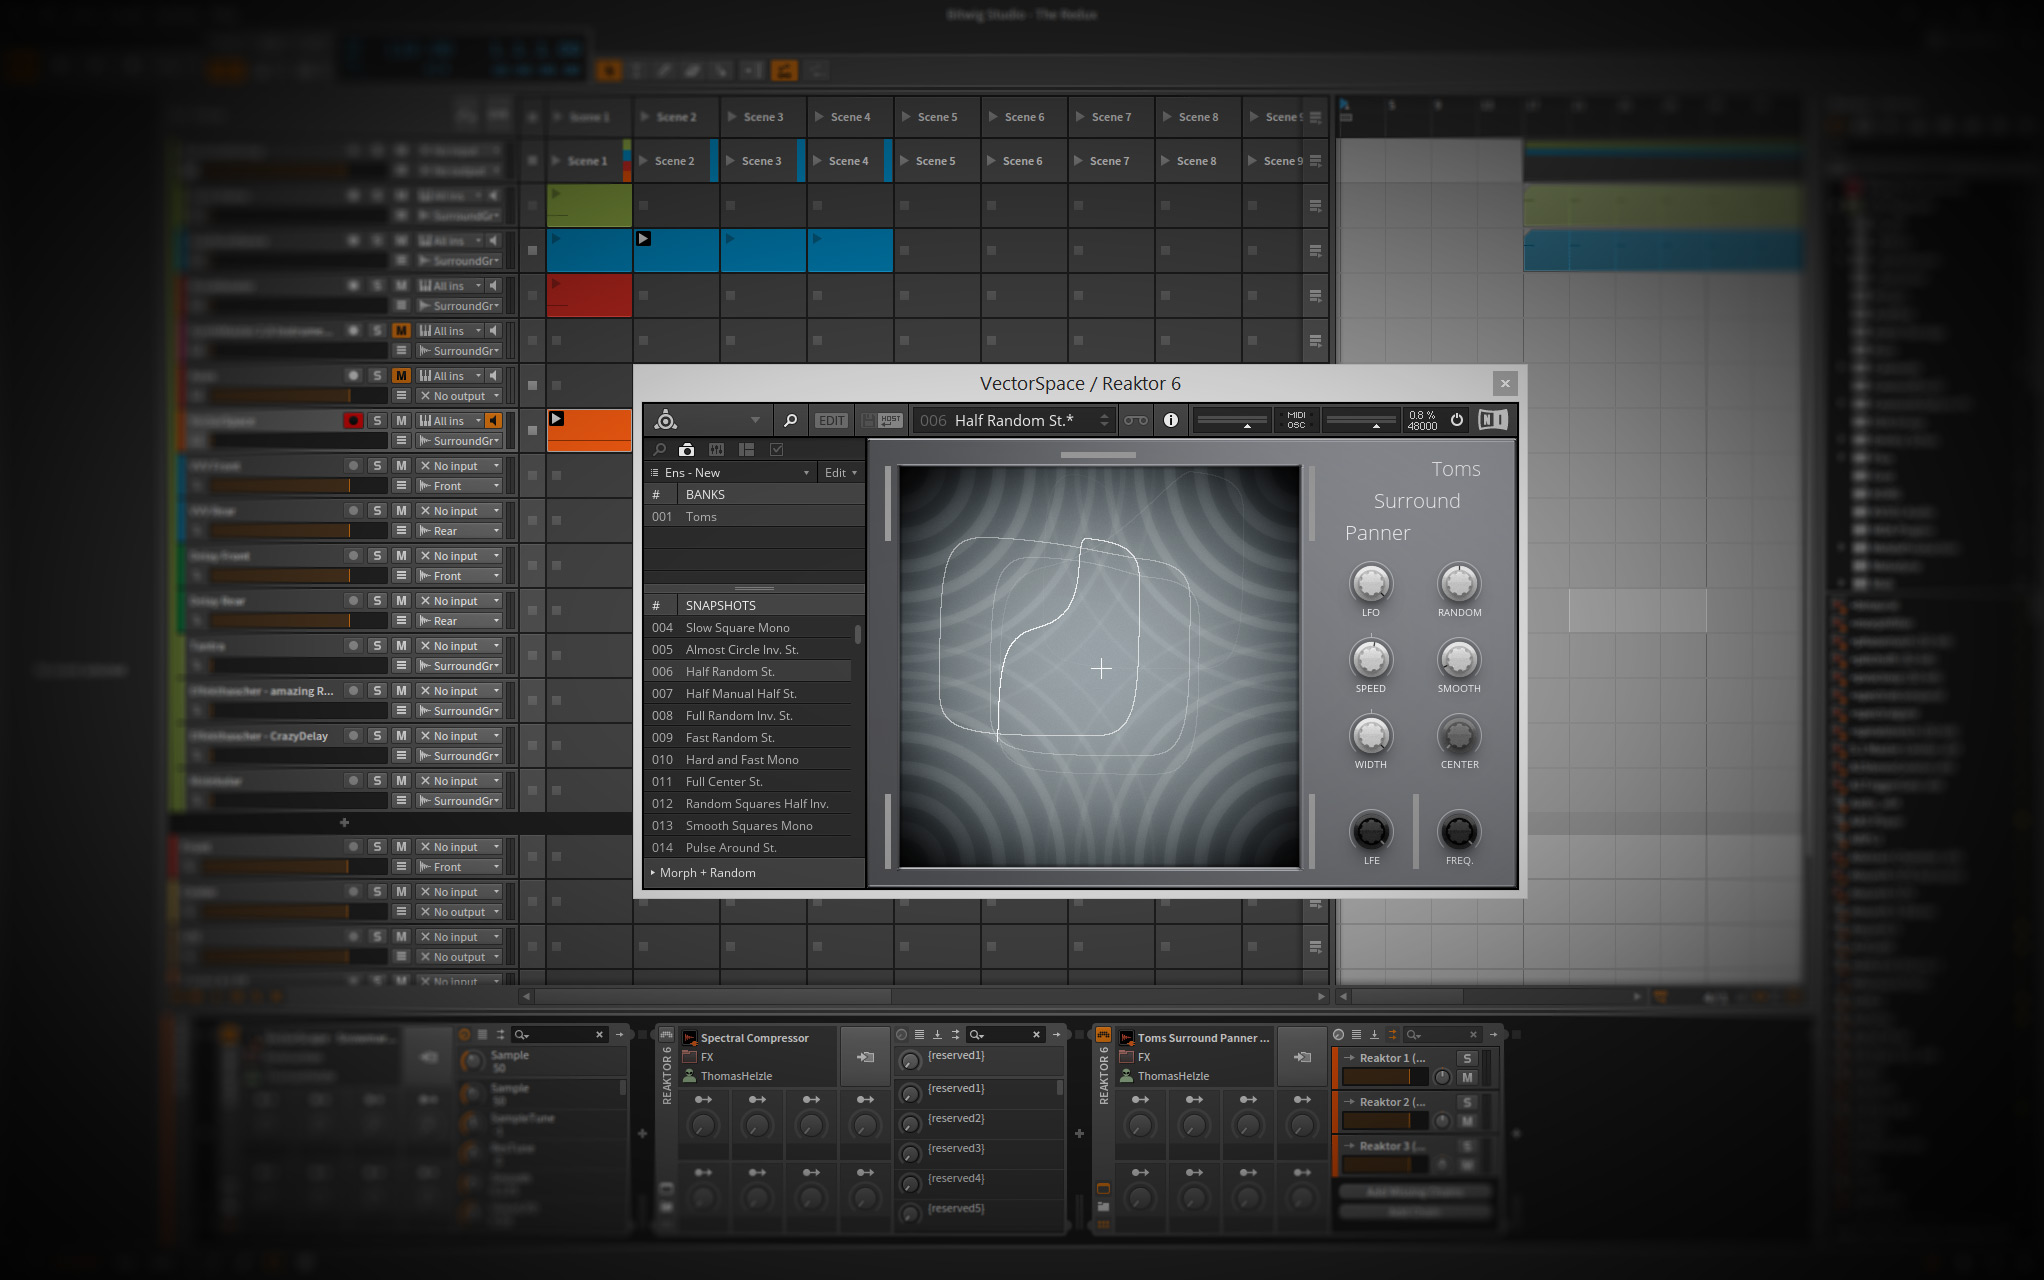 My Tool for NI Reaktor 6 to enable simple surround panning in Bitwig Studio